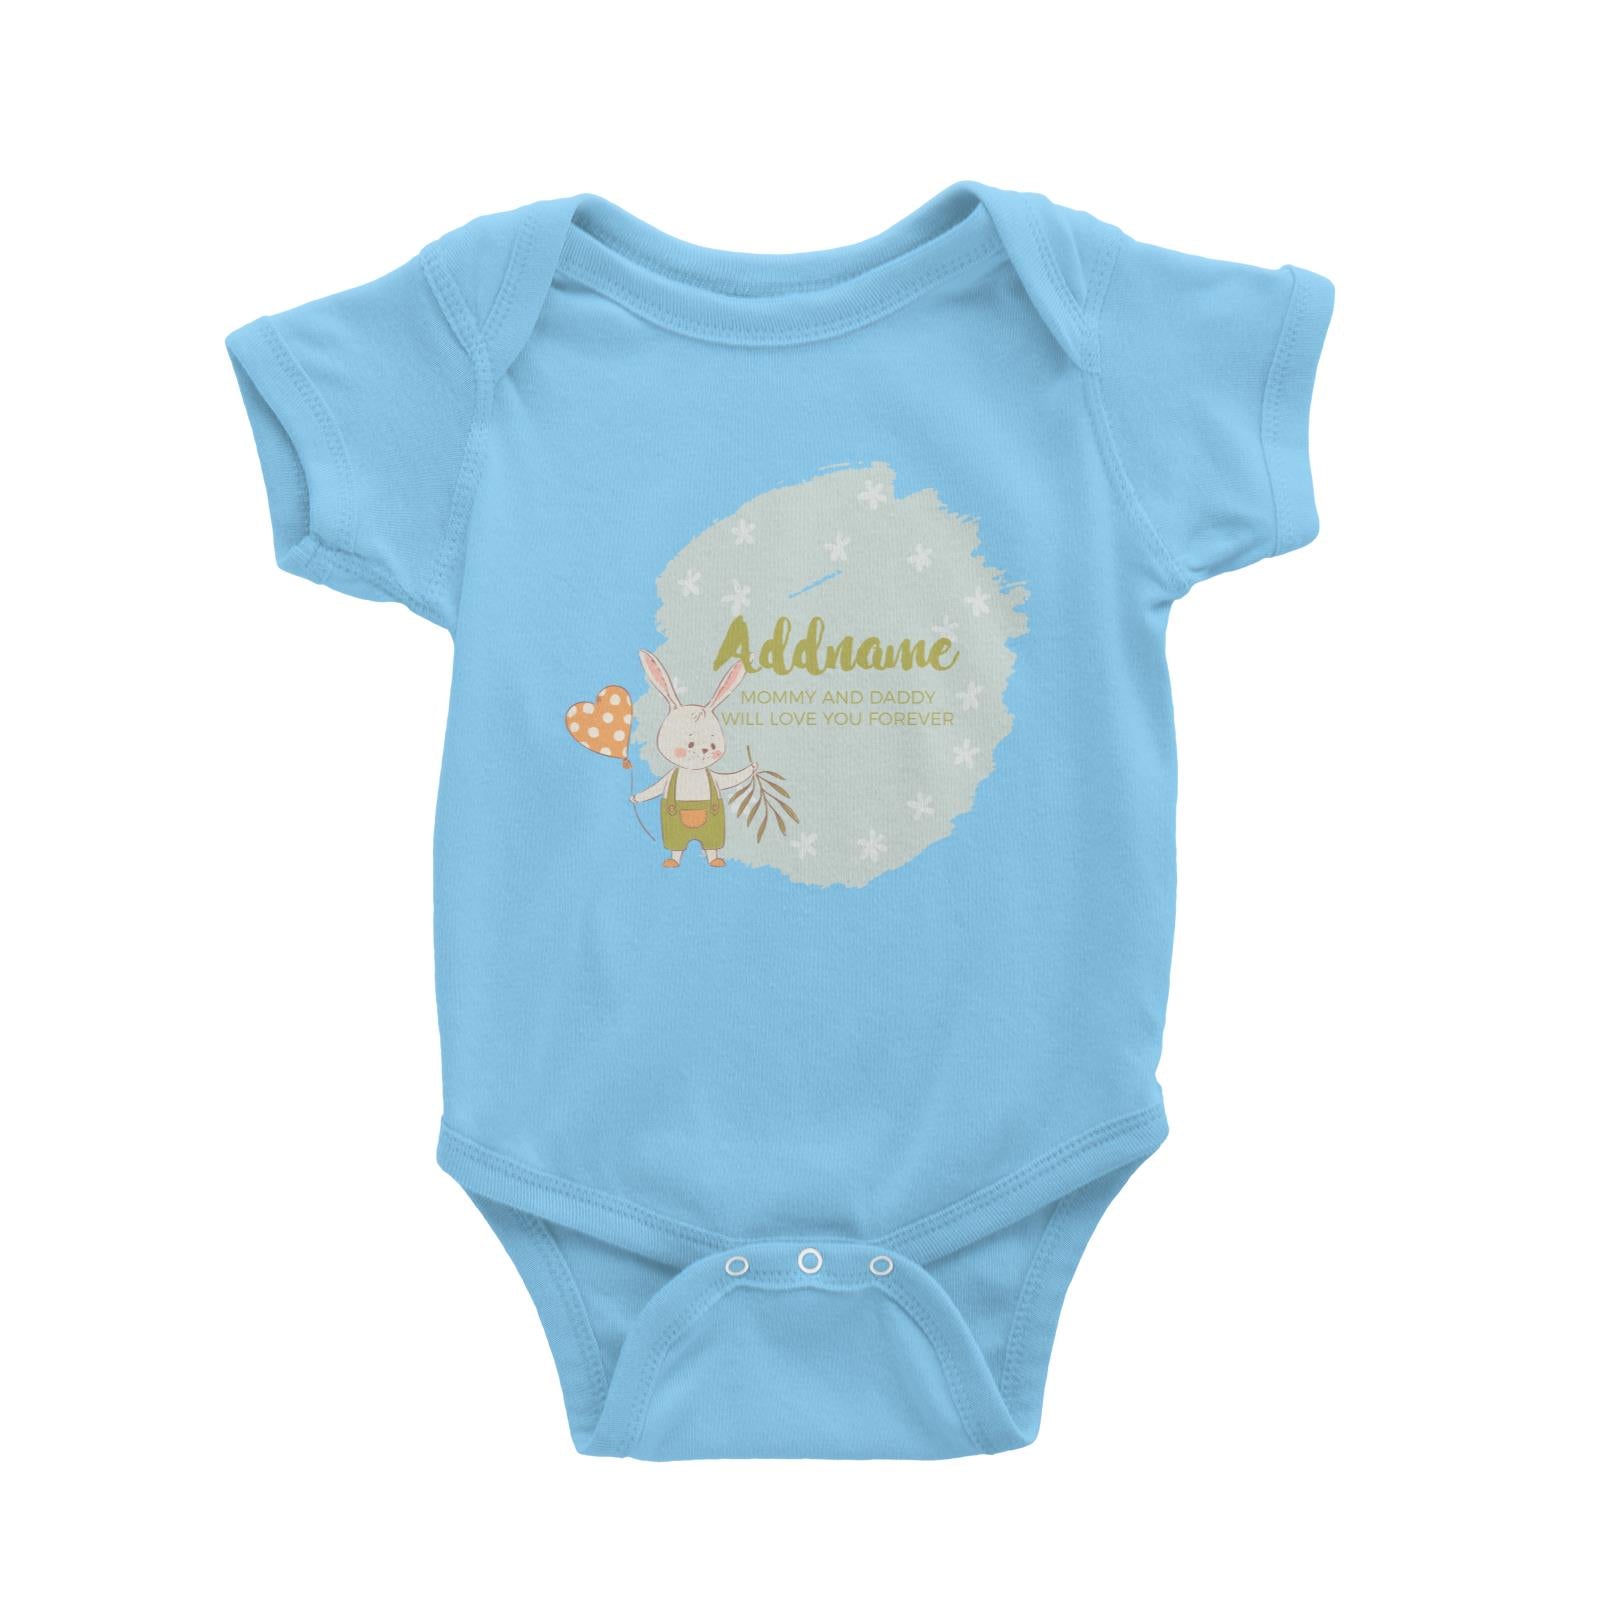 Cute Boy Rabbit with Heart Balloon Personalizable with Name and Text Baby Romper